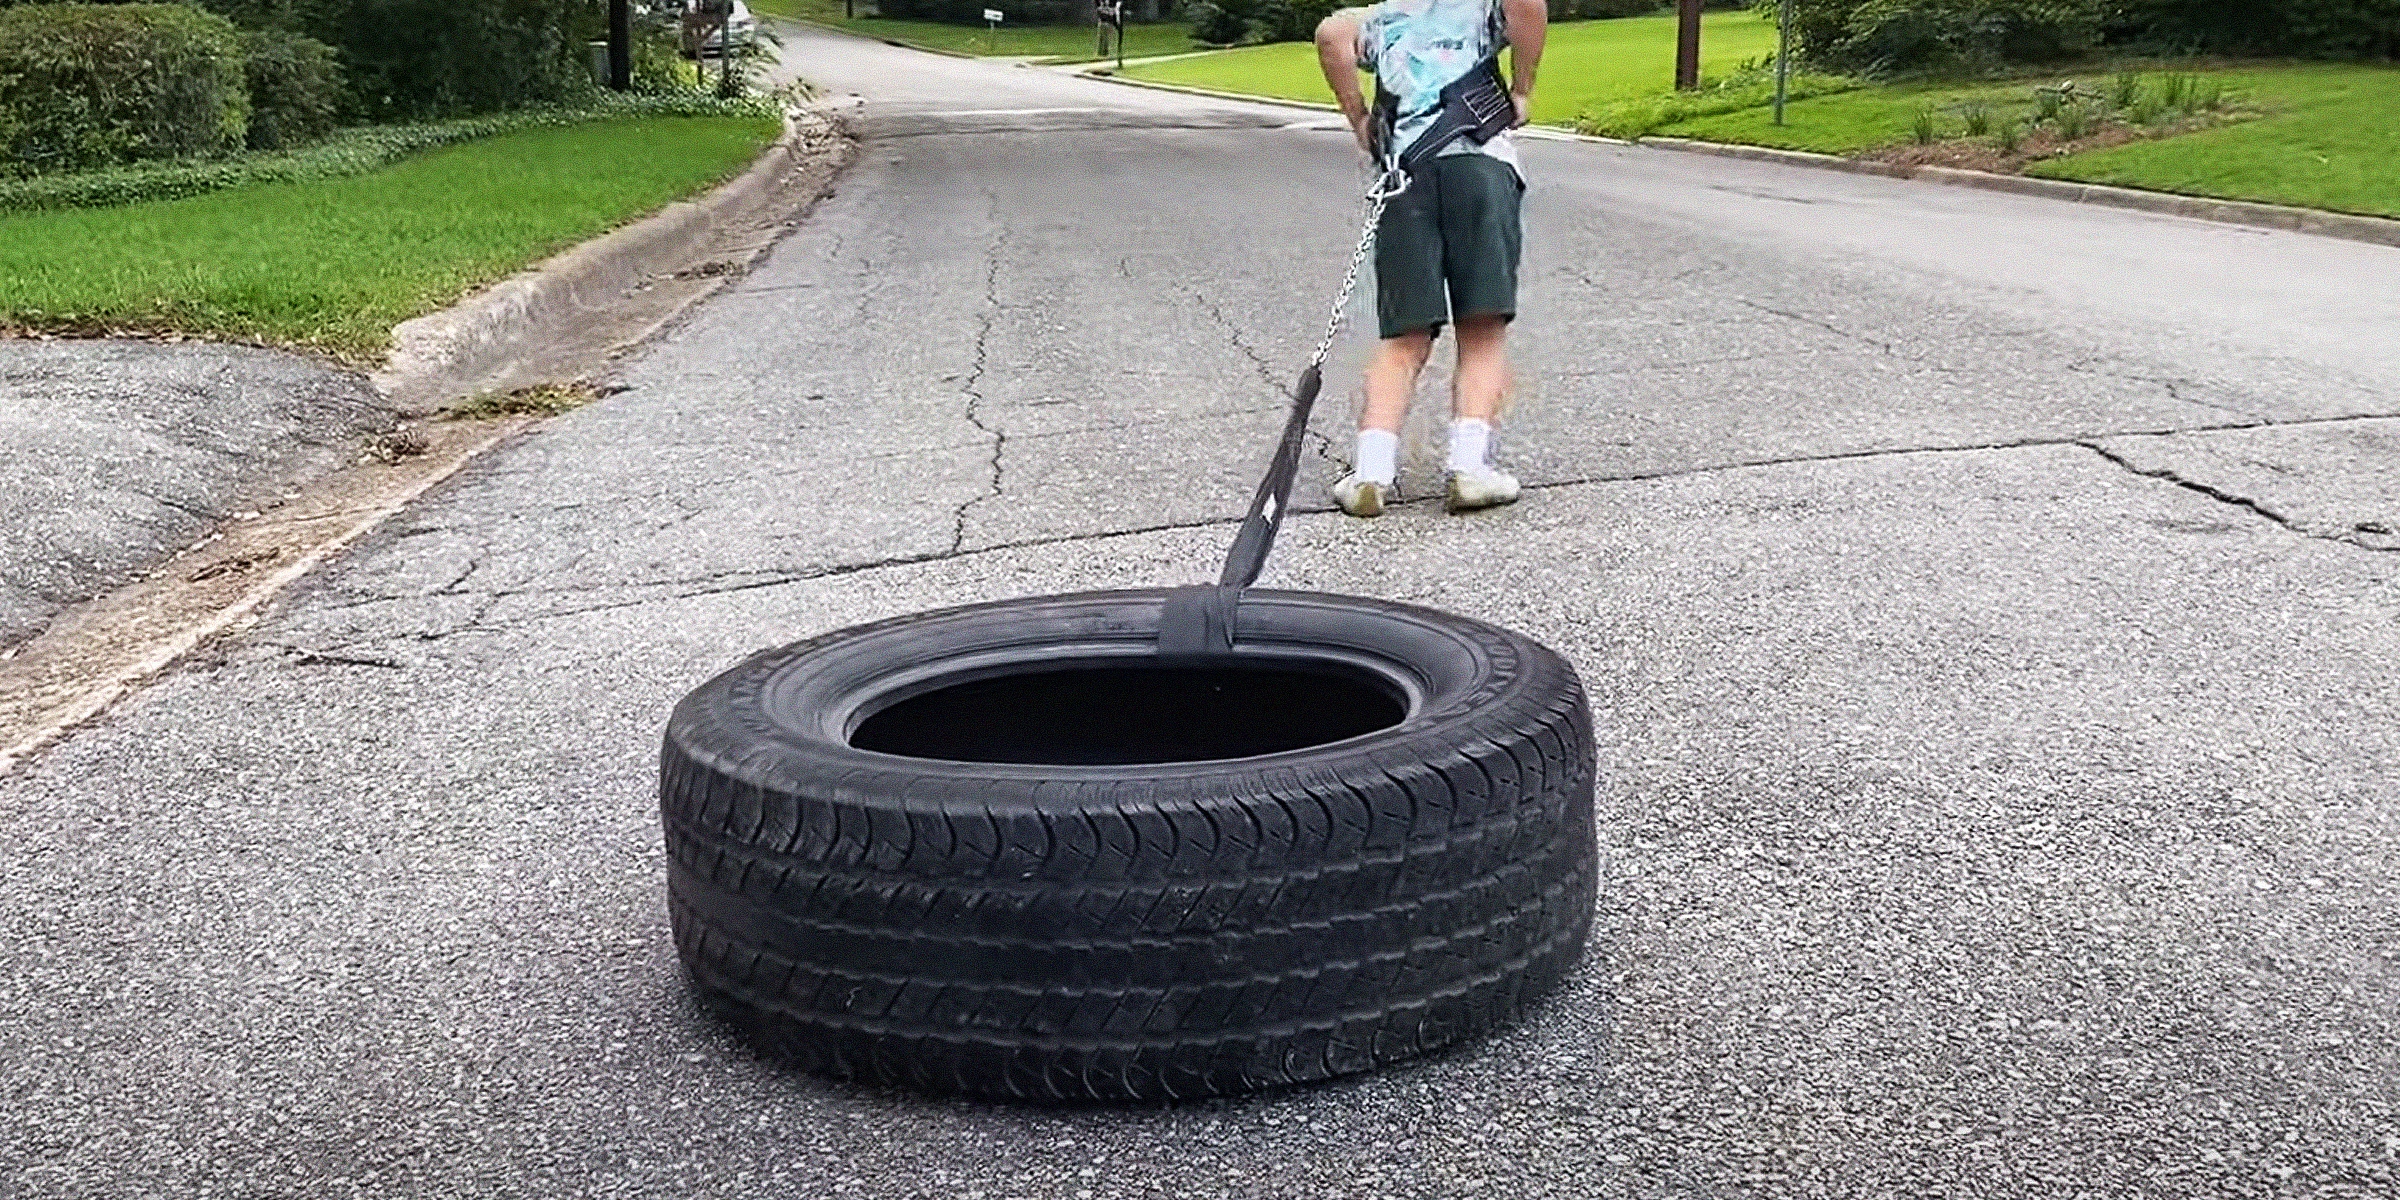 A person training with a tire sled | Source: YouTube/MaddenScience